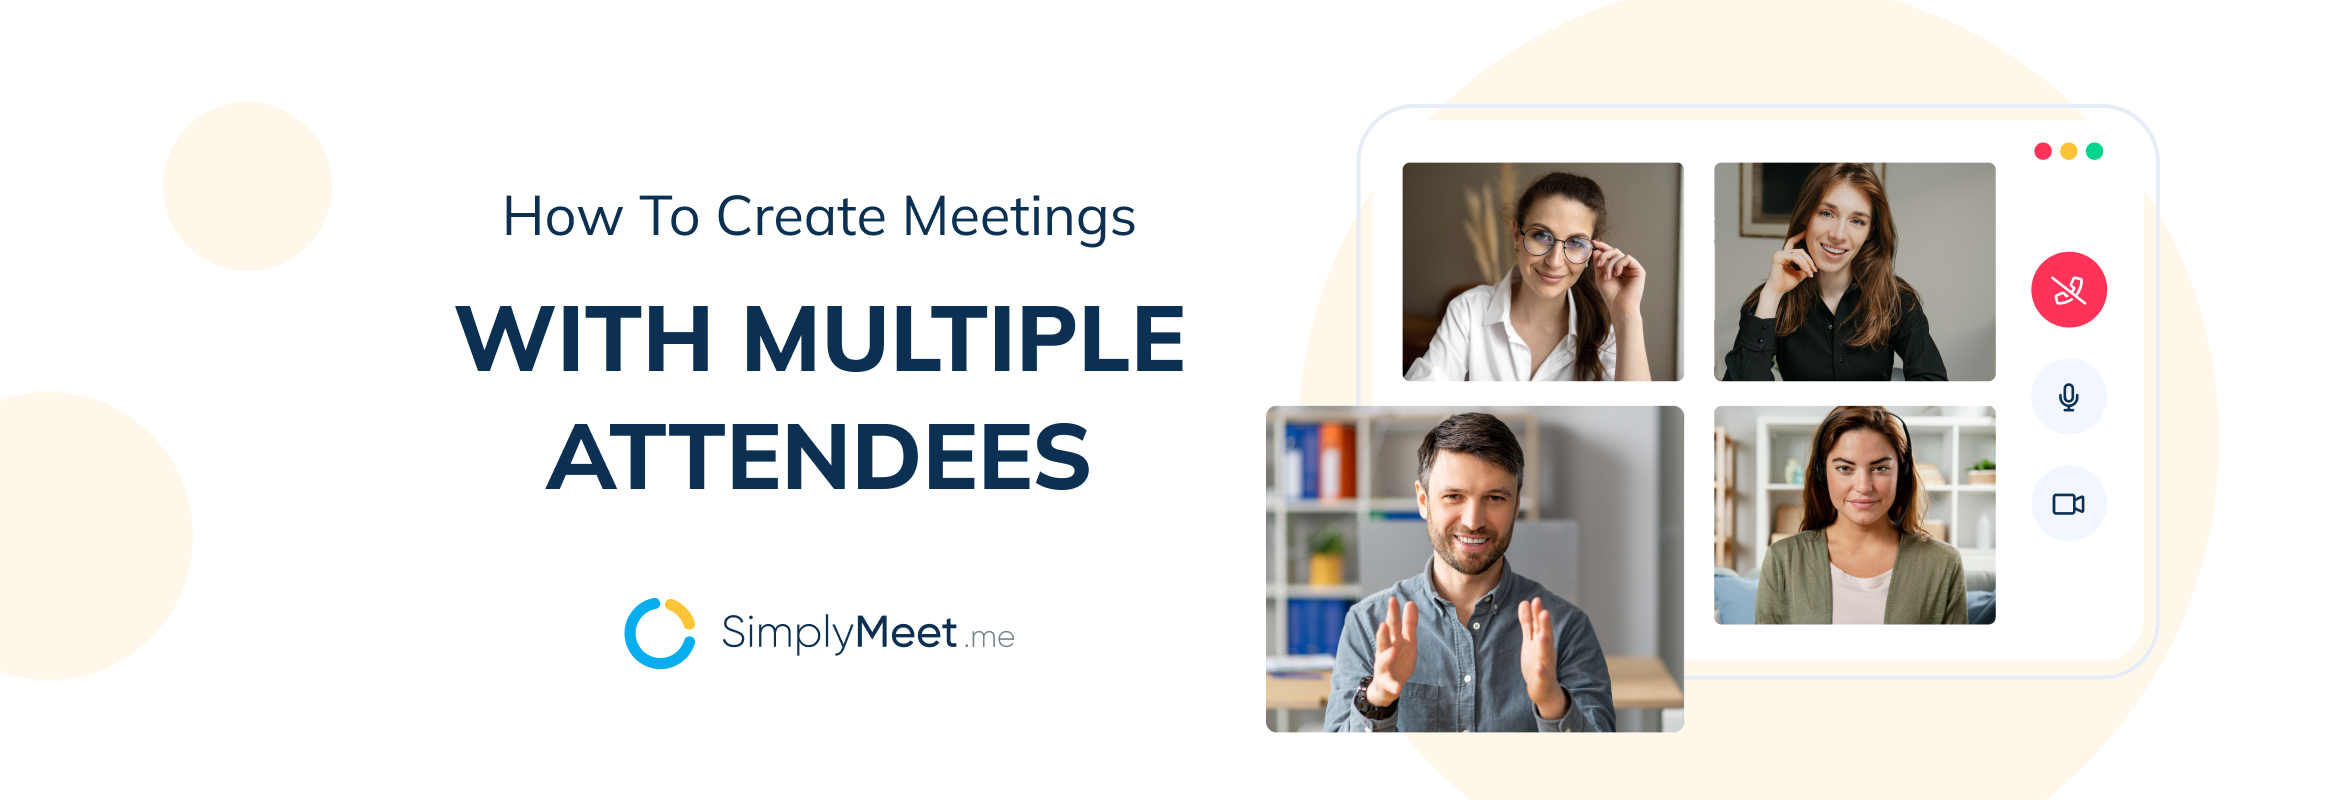 How to Create Meetings with Multiple Attendees